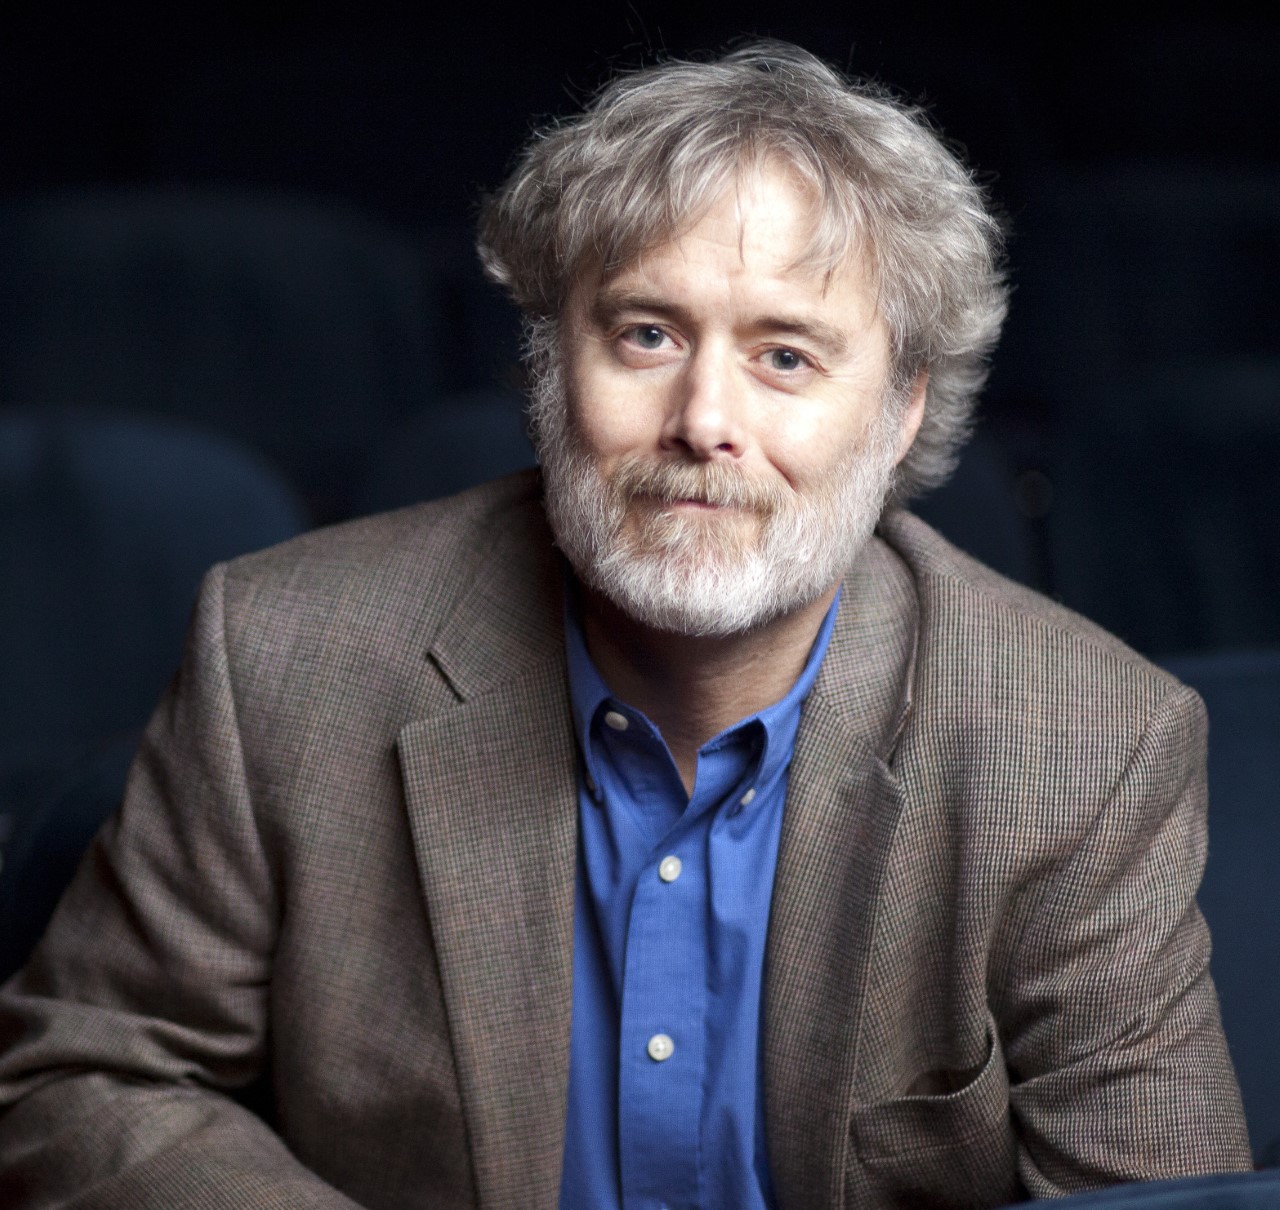 Color photograph of a man (Perry Alexander) with gray hair and a beard wearing a blue shirt and light brown suit jacket